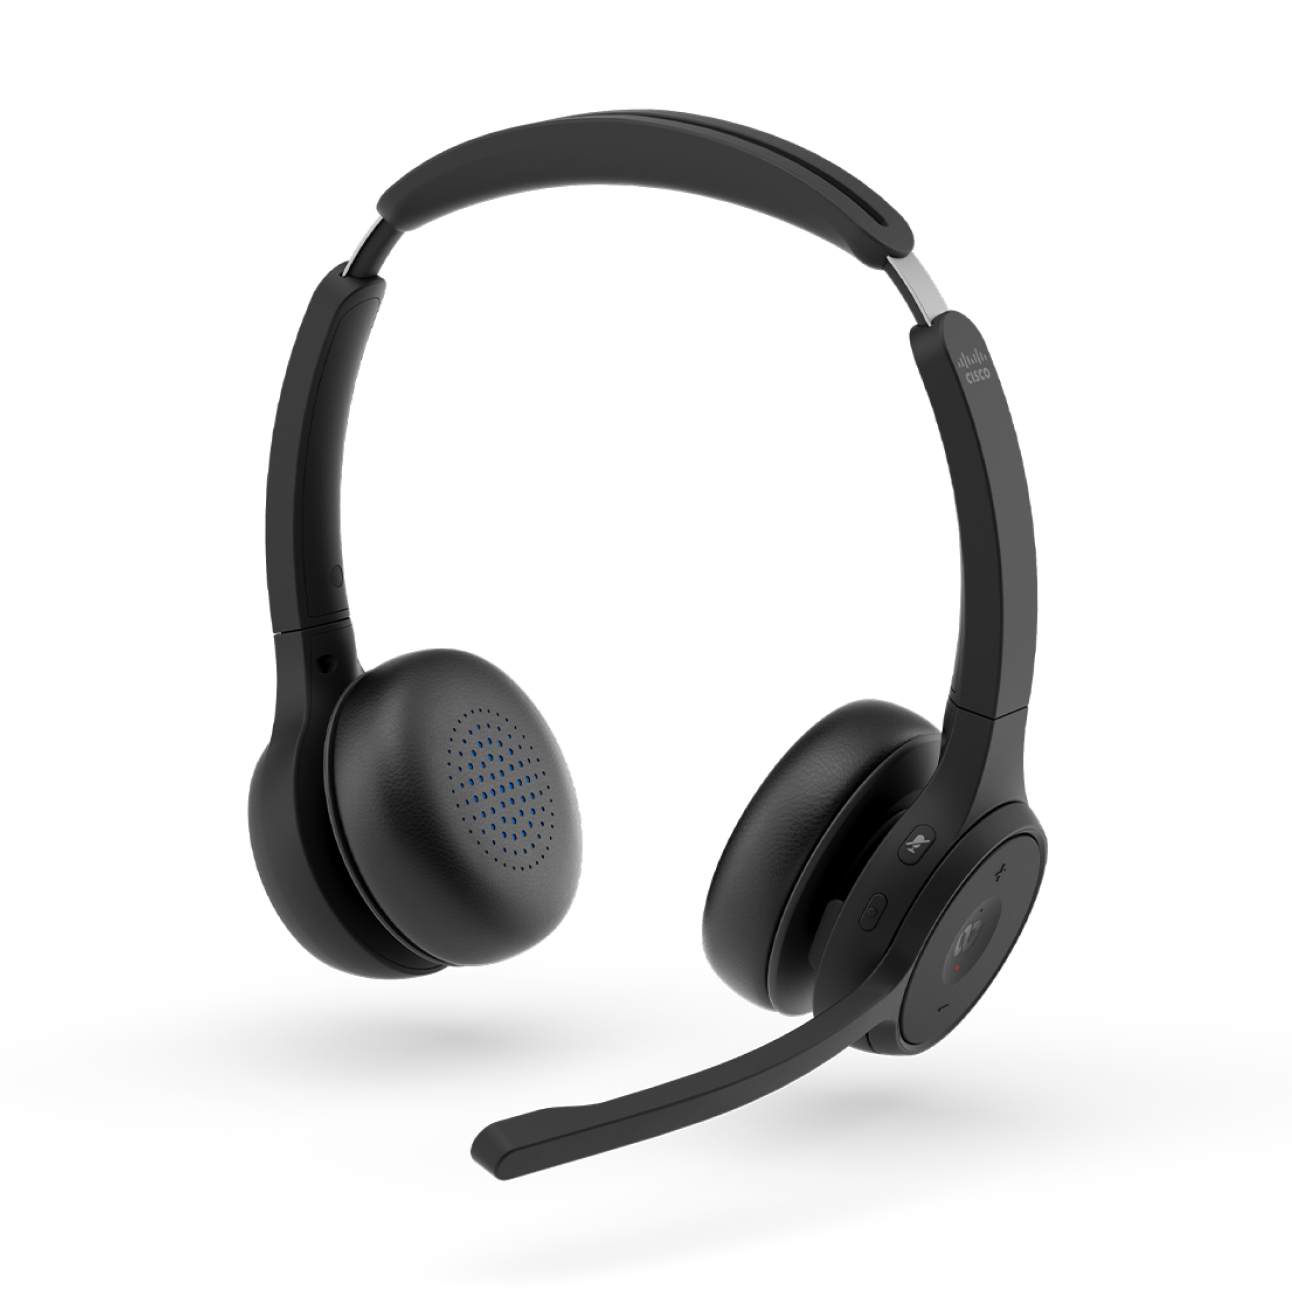 https://www.webex.com/content/dam/www/us/en/images/devices/headsets/cisco-headset-720-series/headset-L1.png